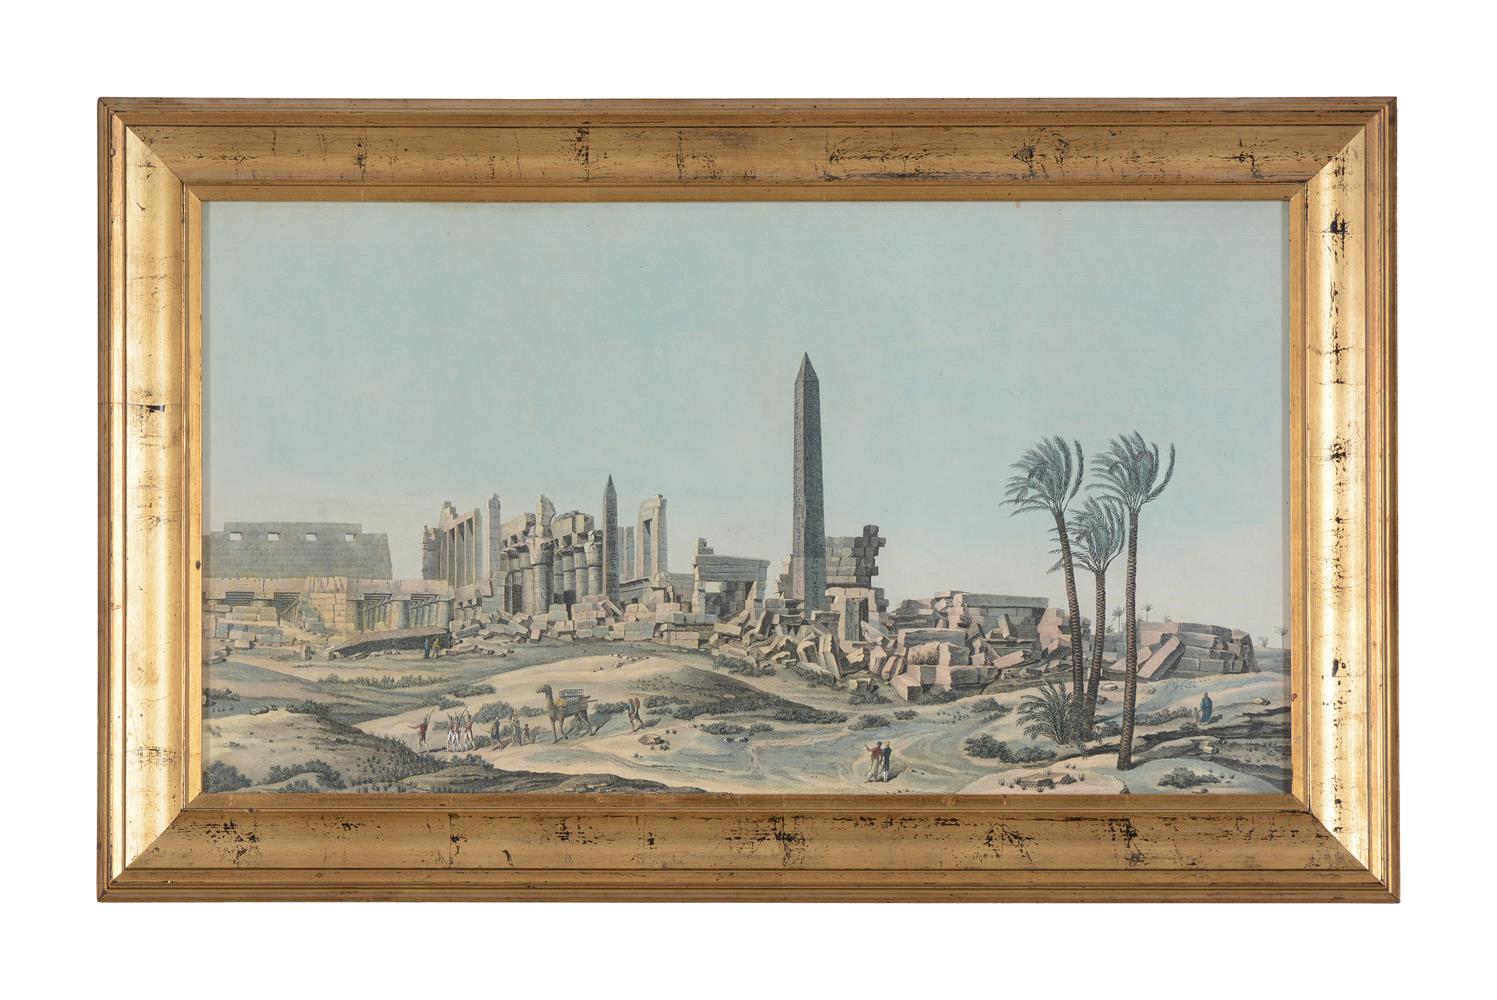 SIX HAND-COLOURED ENGRAVINGS OF EGYPT (LUXOR, KARNAK, DENDERA), EARLY 19TH CENTURY - Image 5 of 13